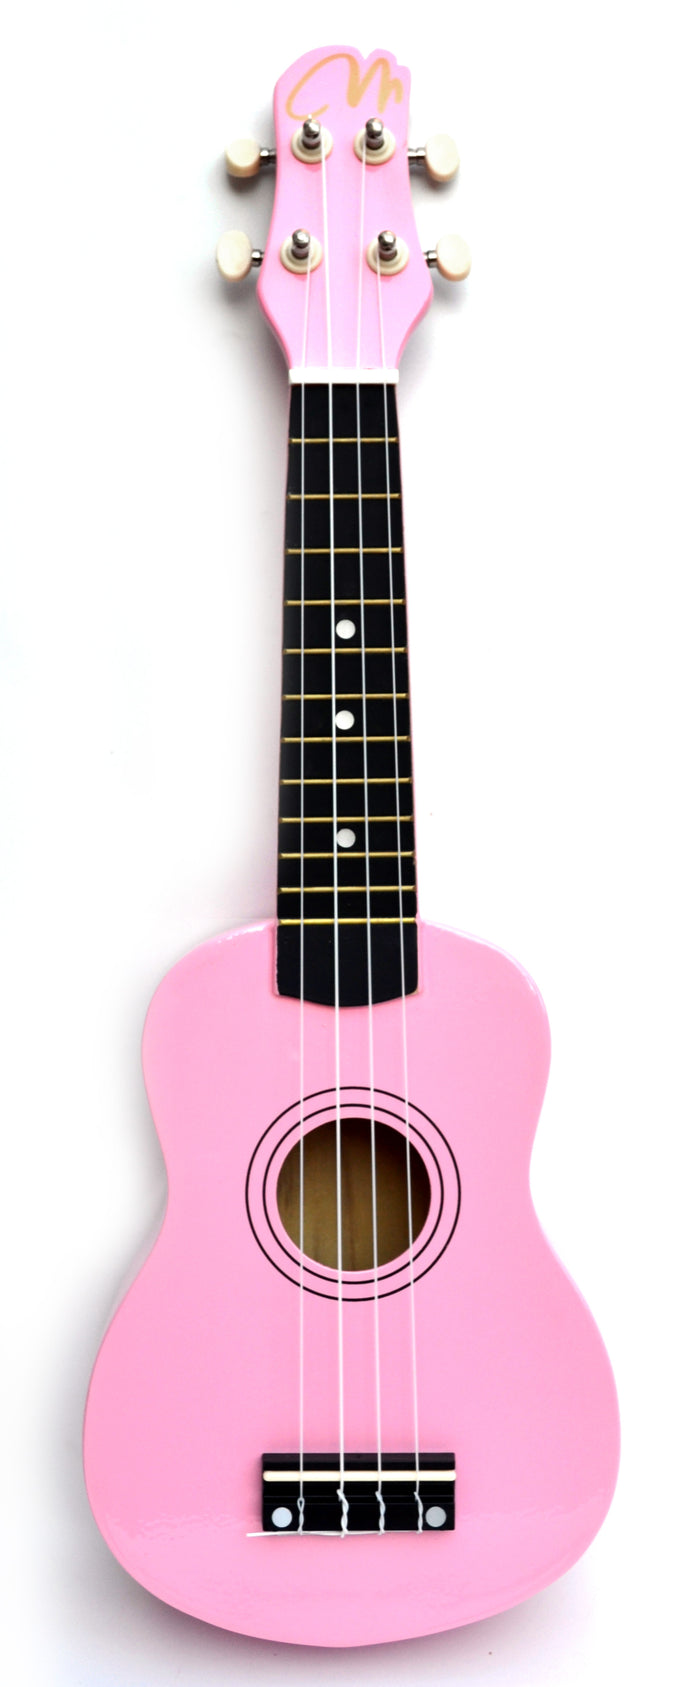 Magma Soprano Ukulele 21 inch Glossy Pink Color with Bag (MK20RSB)